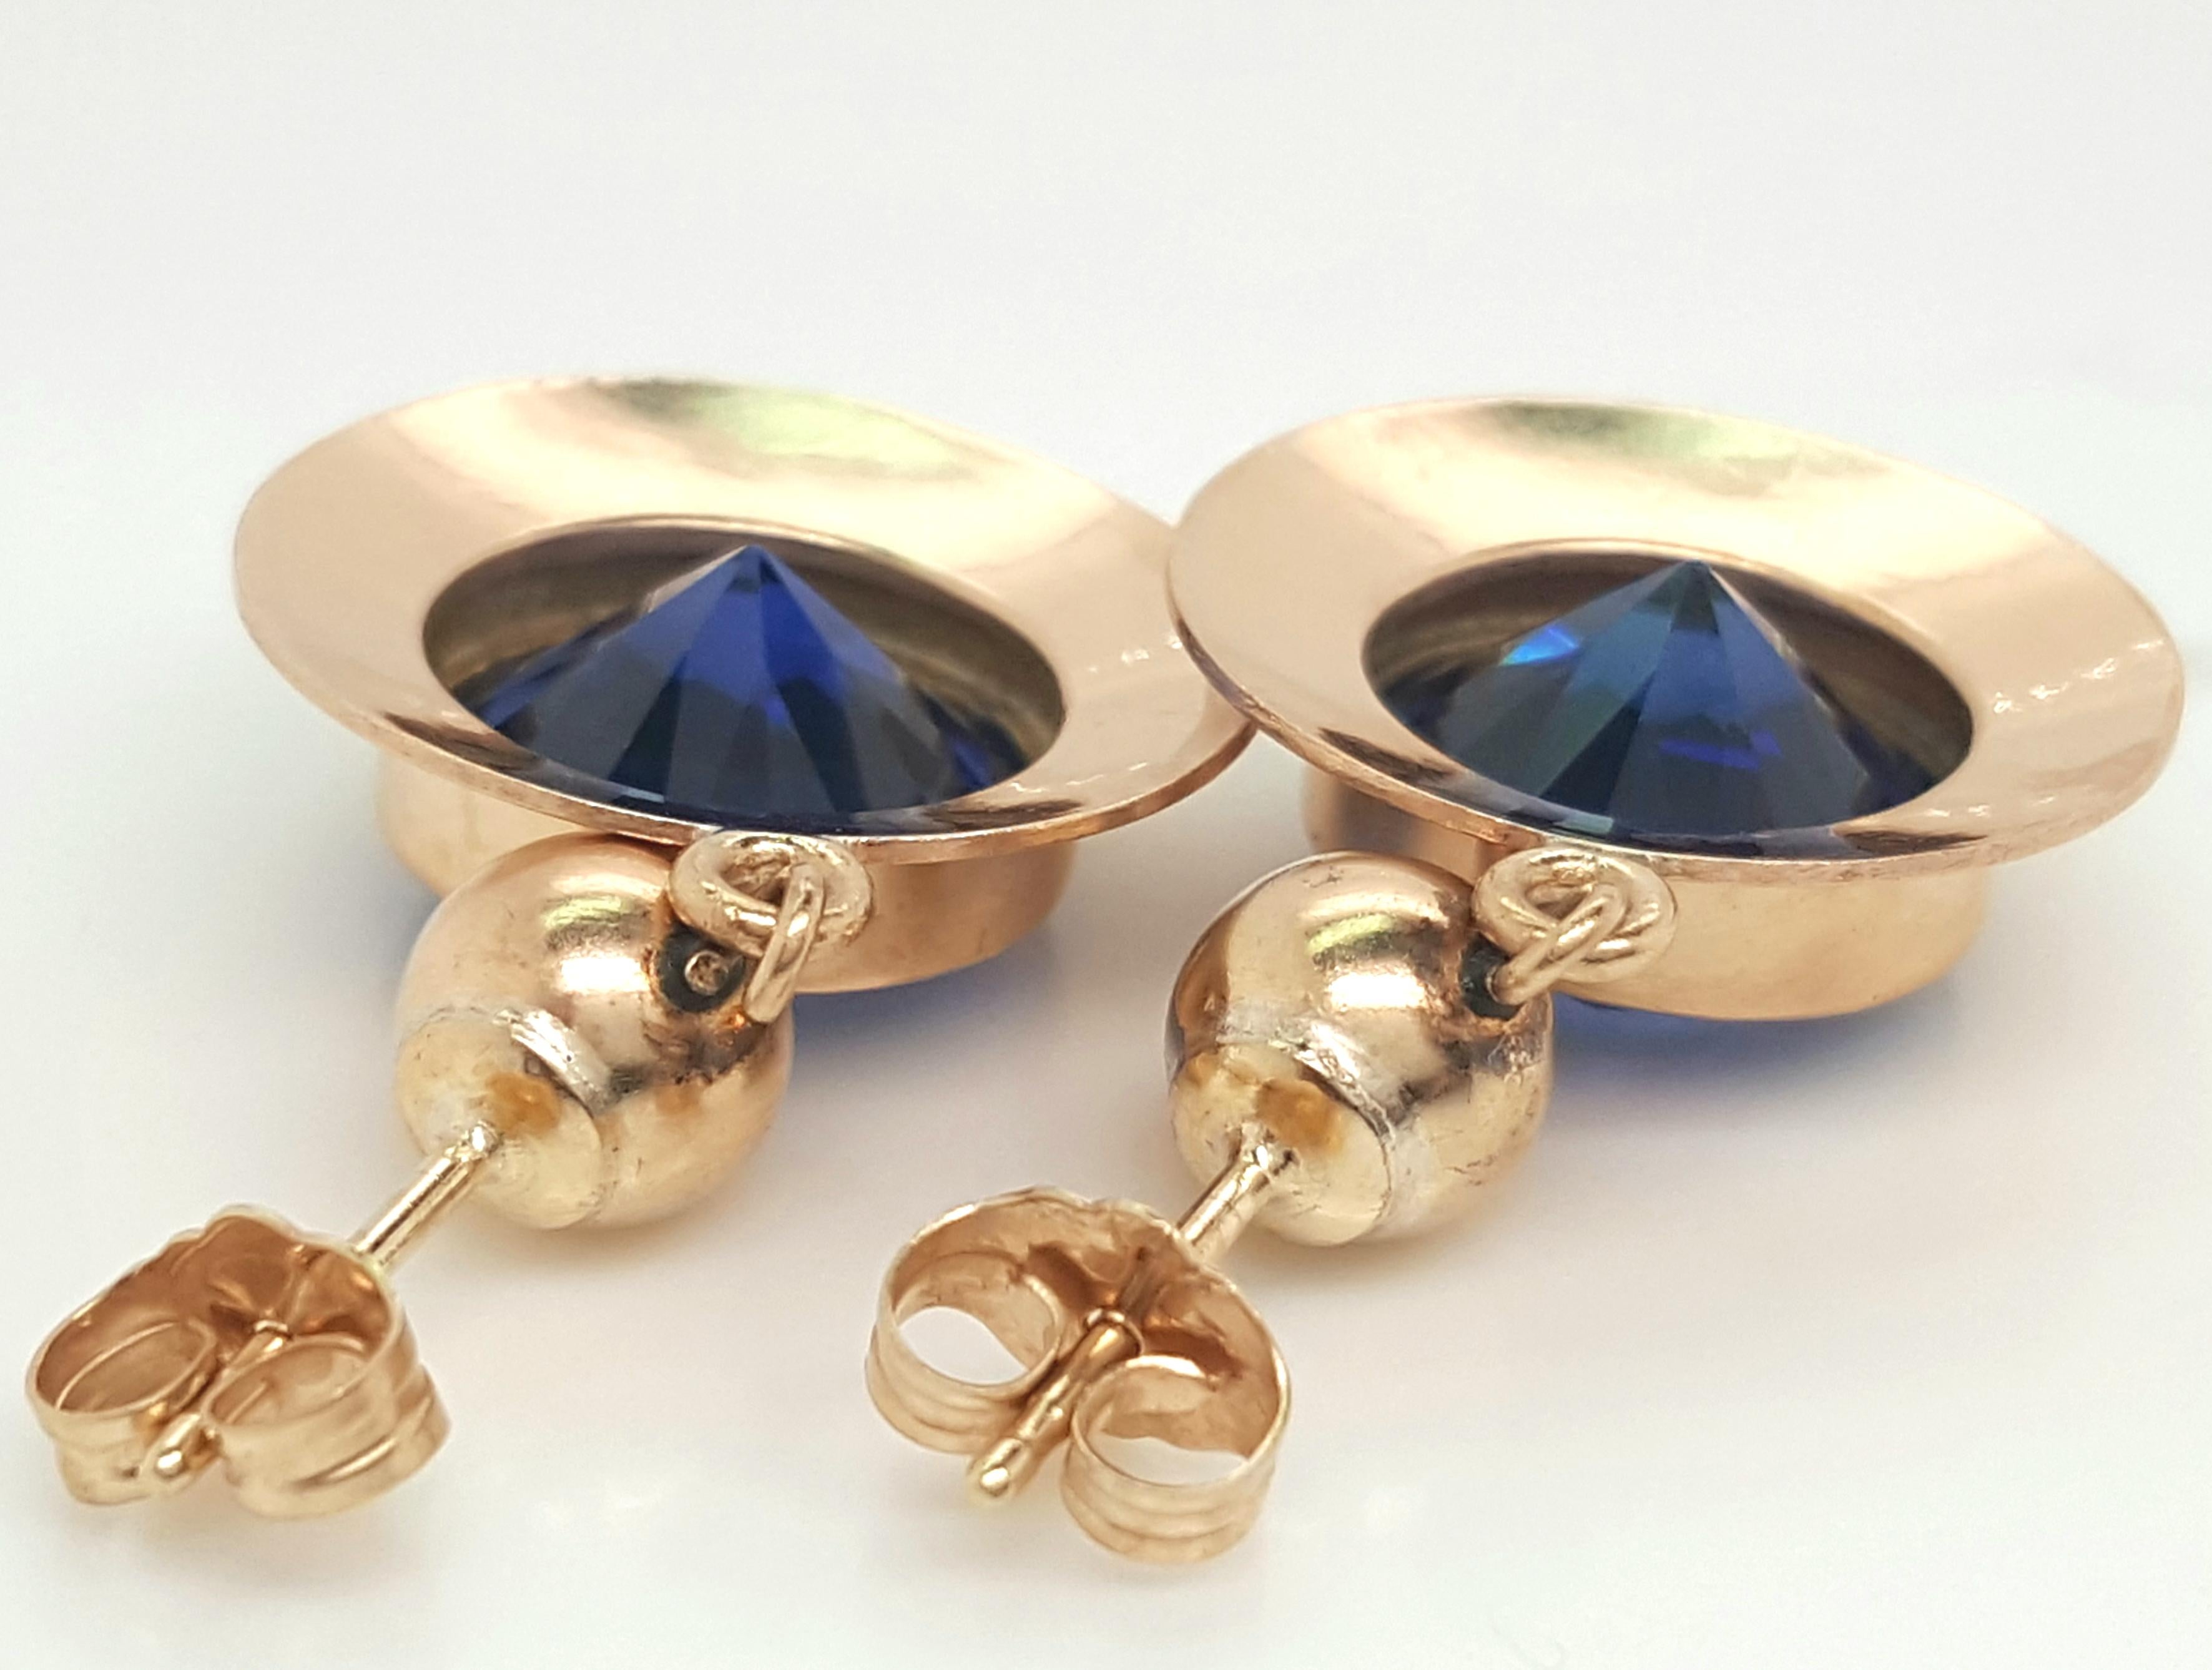 Estate 14 Karat Yellow Gold Synthetic Sapphire Dangle Earrings.  The earrings feature a pair of impressively sized round blue synthetic sapphires.  The stones are each set into a 14 karat yellow gold bezel enhanced by a recessed textured gold halo,